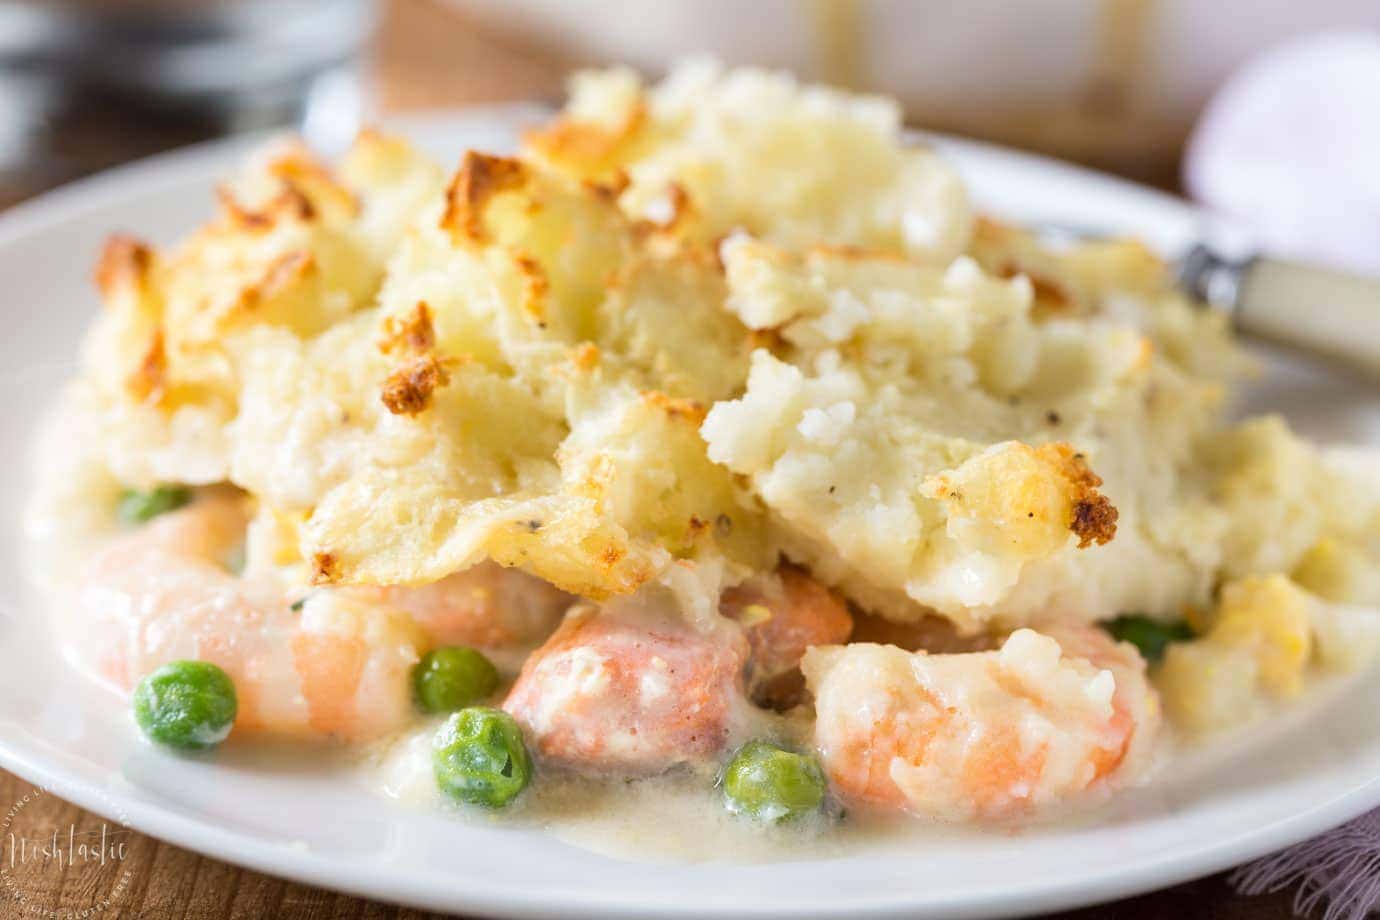 Fish Pie is classic British recipe that's easy to make and can be made with a variety of fish and shellfish including, salmon, shrimp, haddock or cod. my recipe is gluten free and dairy free. 